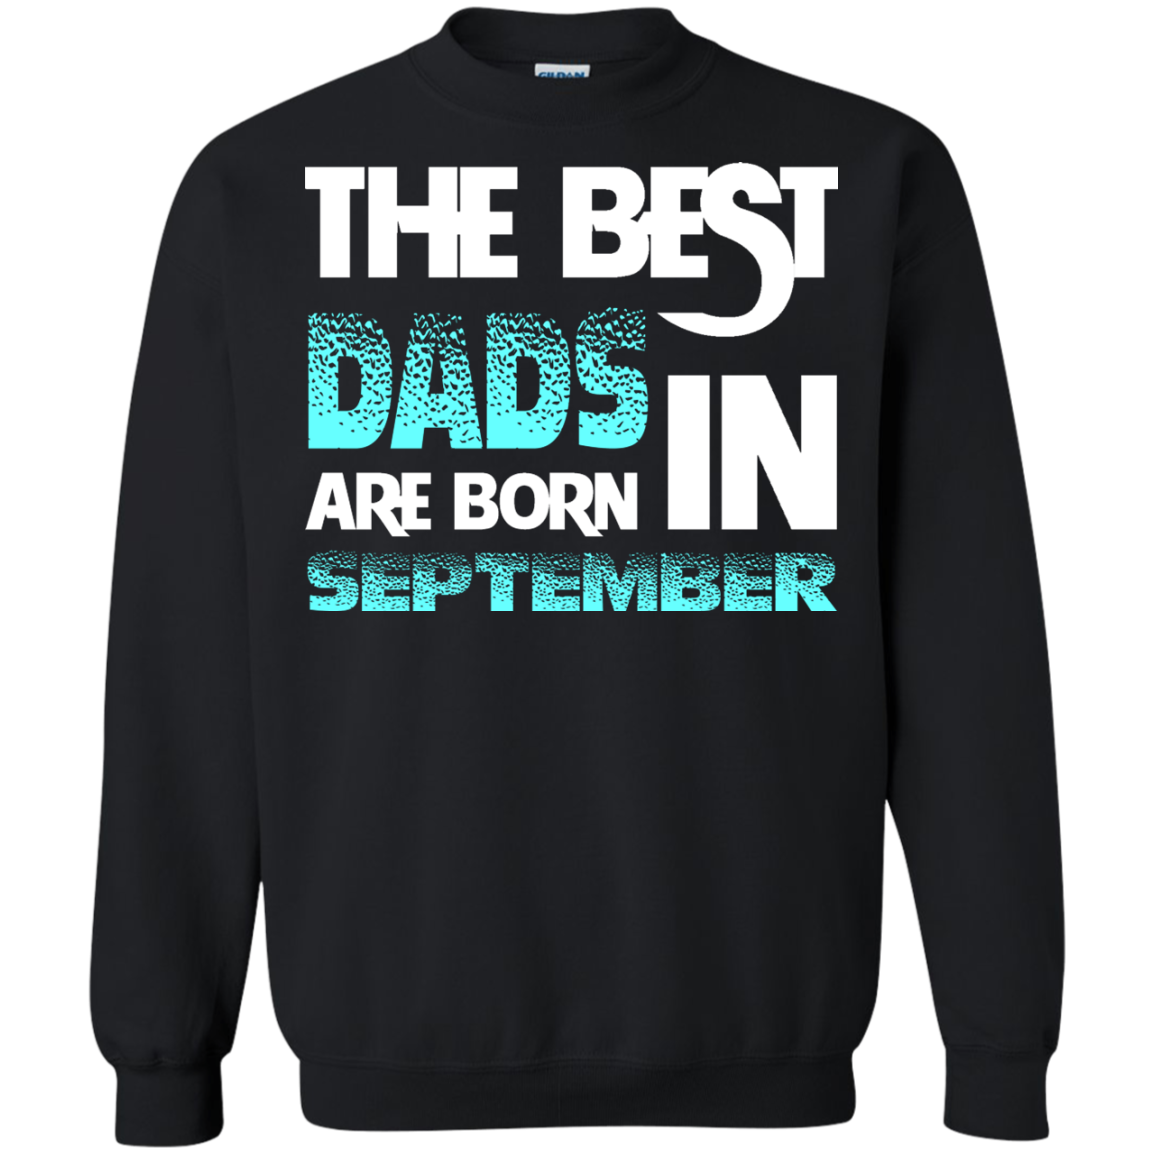 Daddy T-shirt The Best Dads Are Born In September